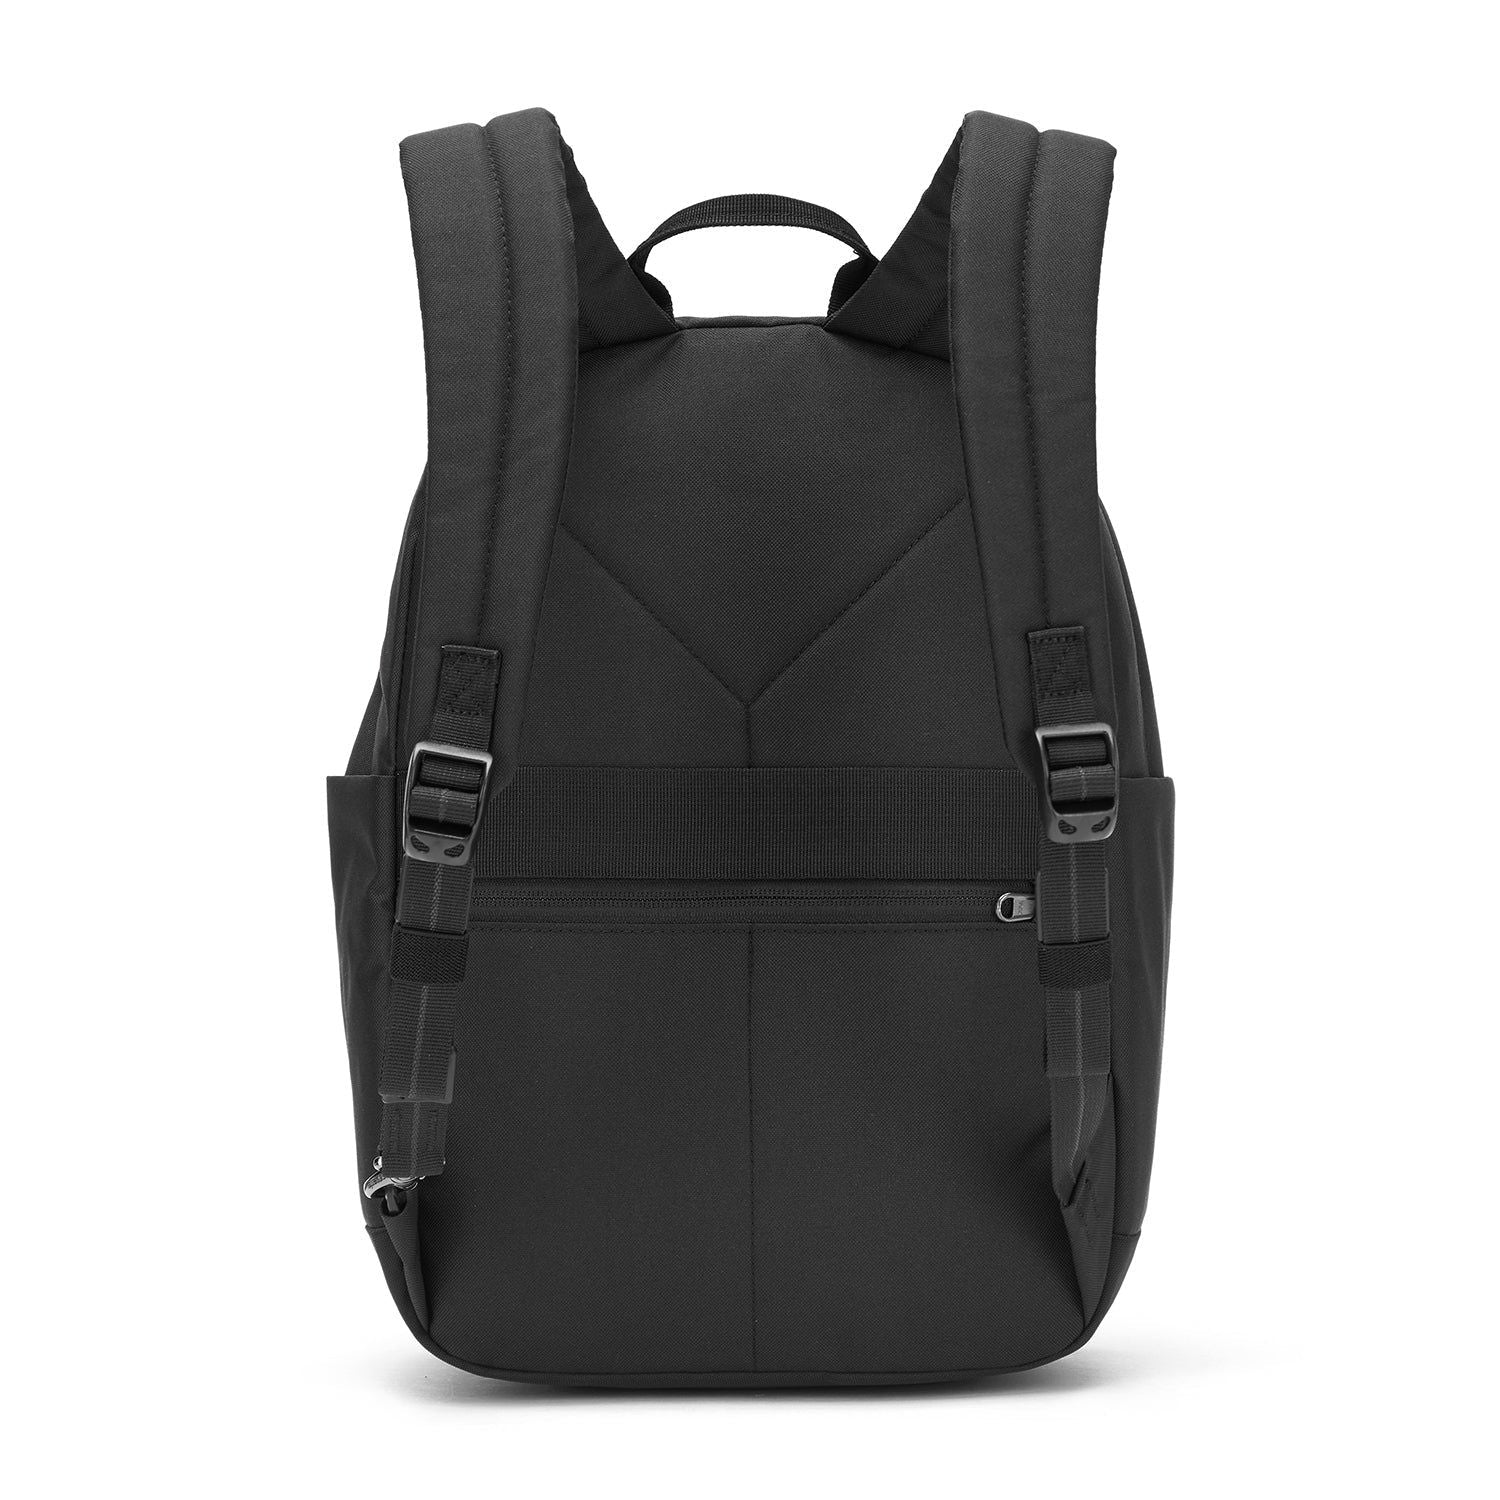 PacsafeGo 15L Anti-Theft Backpack - rainbowbags